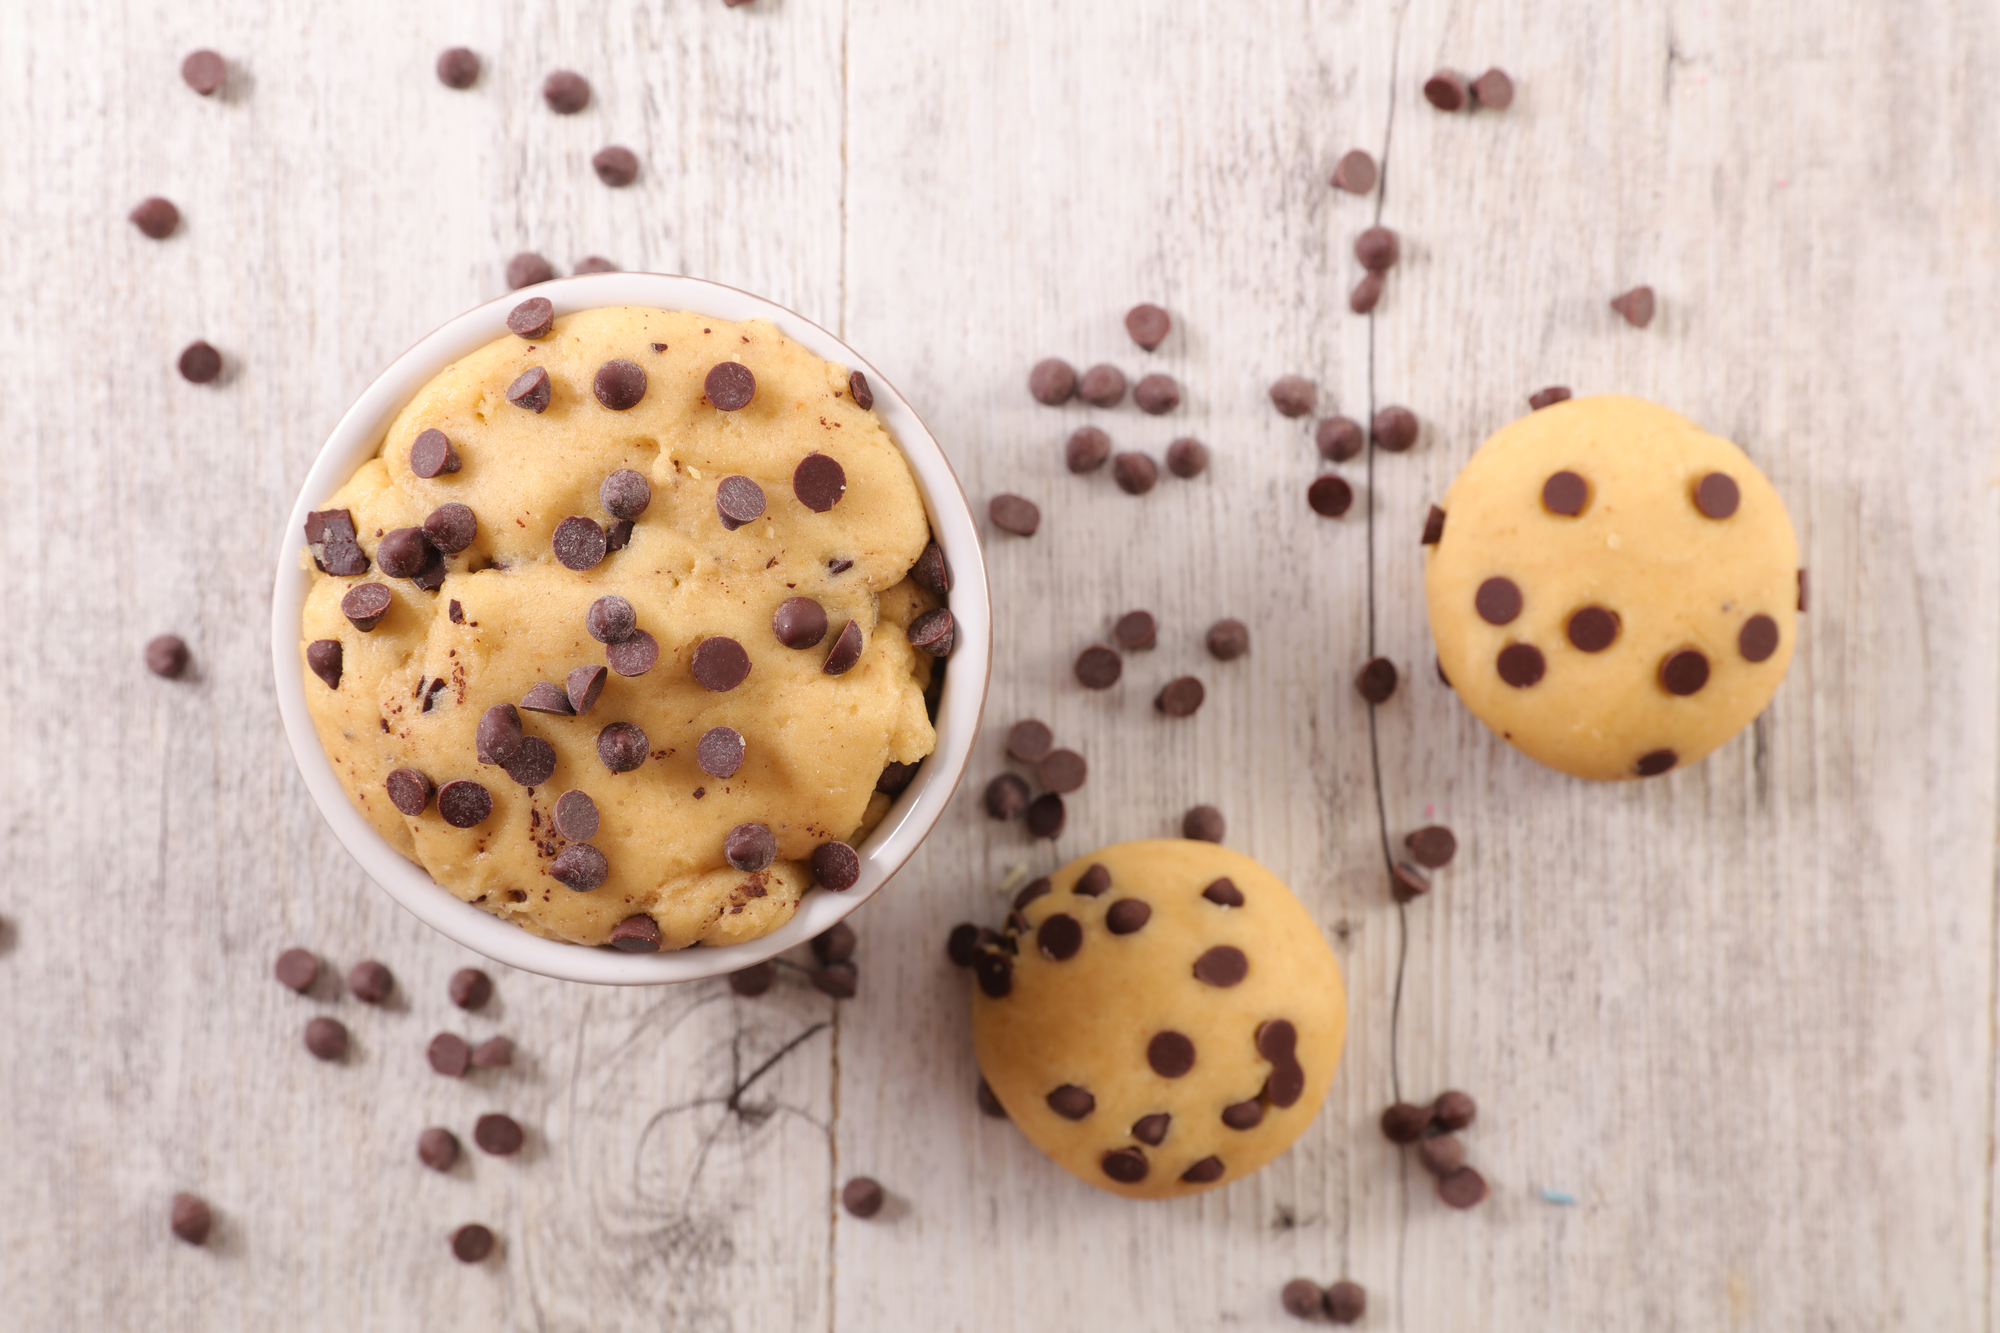 Is It Safe to Eat Cookie Dough